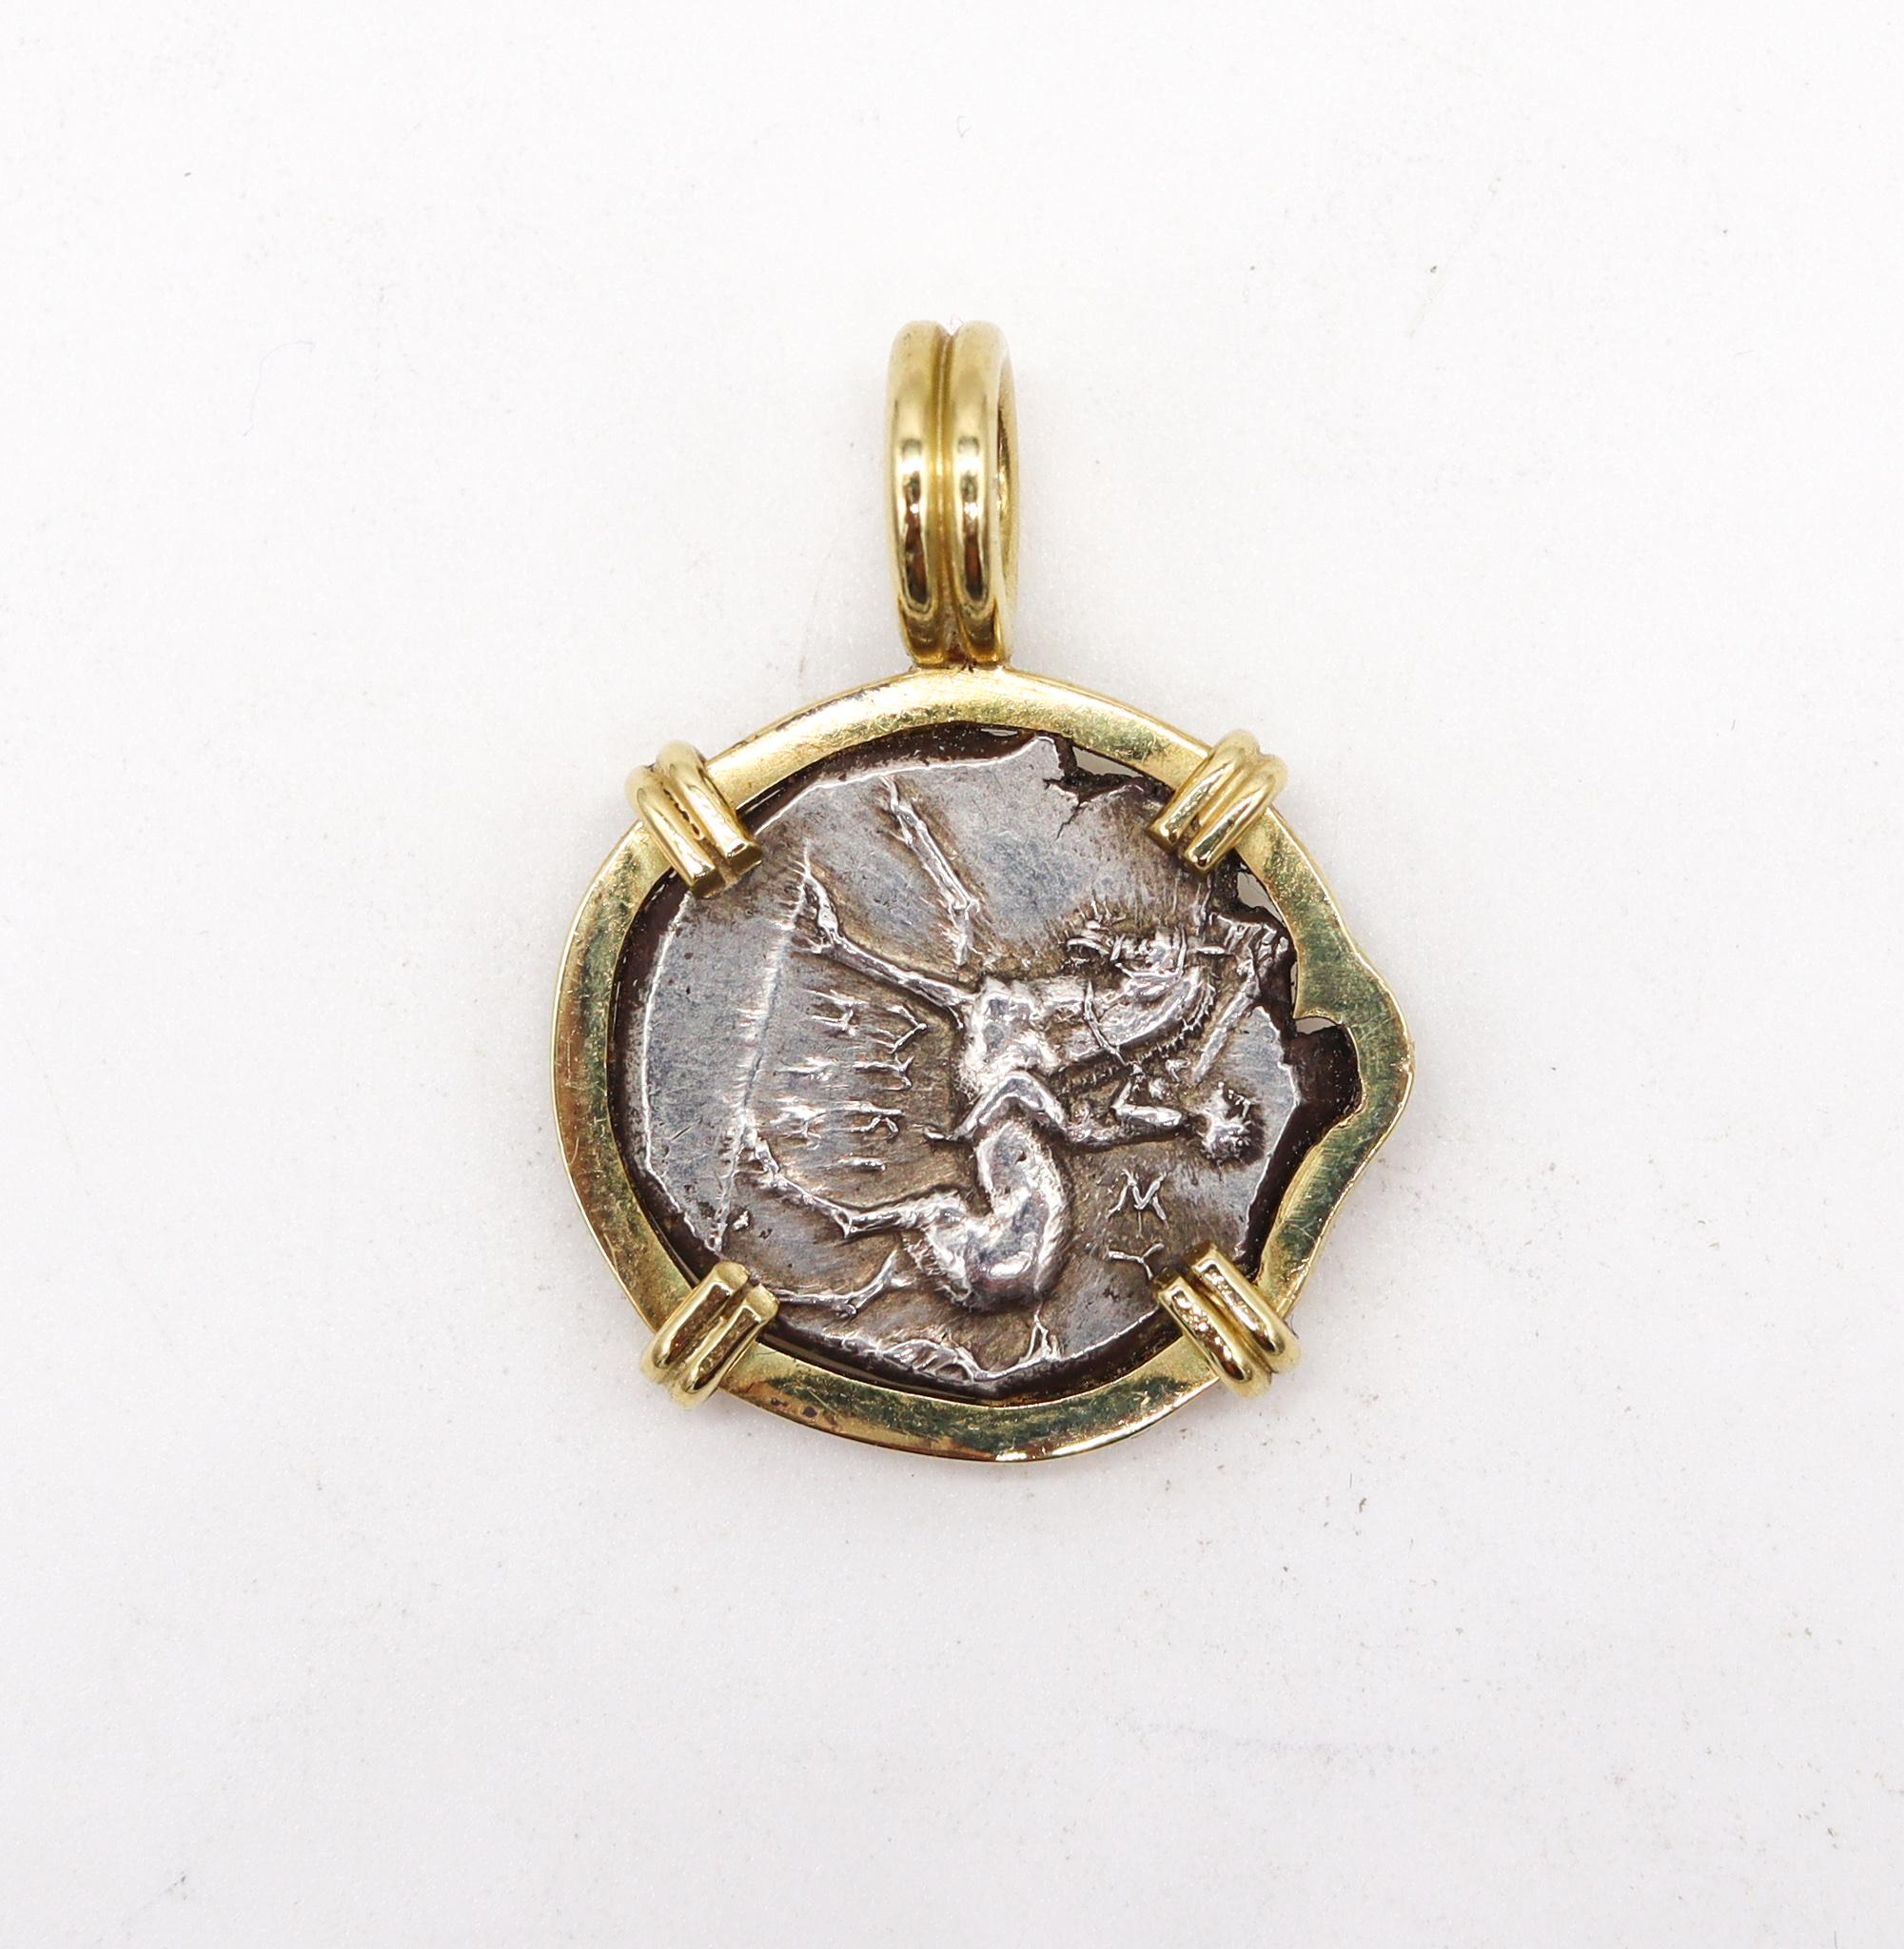 Riding boy in a dolphin framed coin pendant.

An ancient silver coin of one Nomos or Stater struck between 272 - 240 BC in the Greek portuary city of Tarentum, located in Calabria in the very southern Italy.

This coin is carefully mounted in a